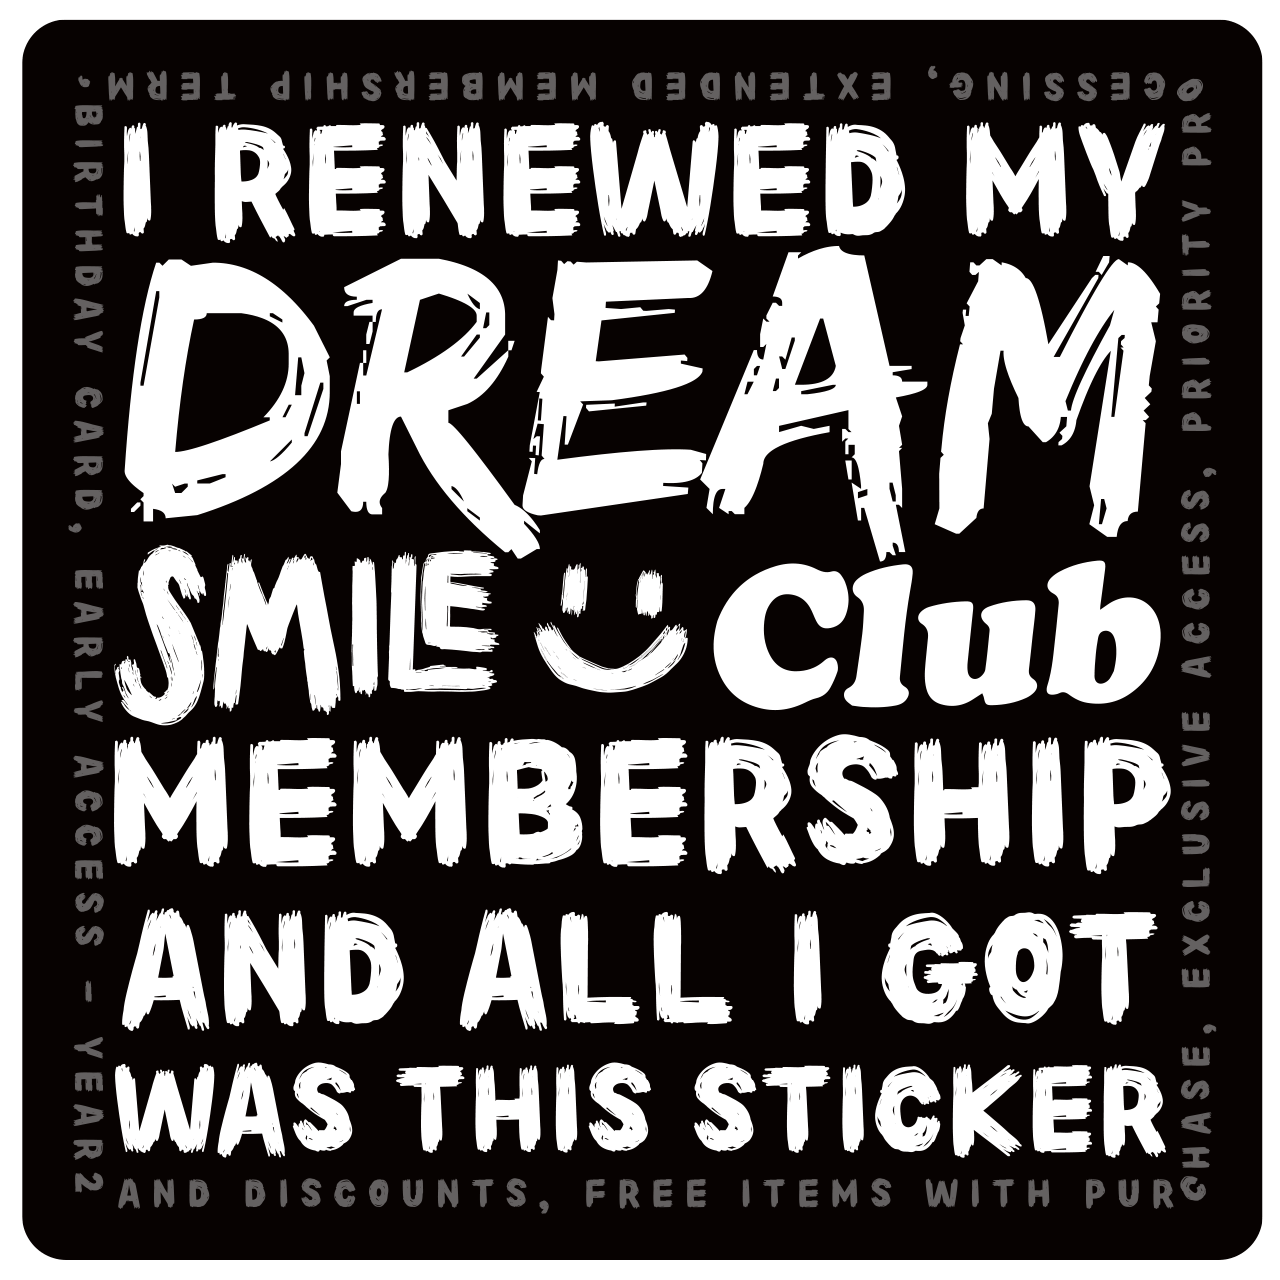 MEMBERS ONLY Renewal Sticker